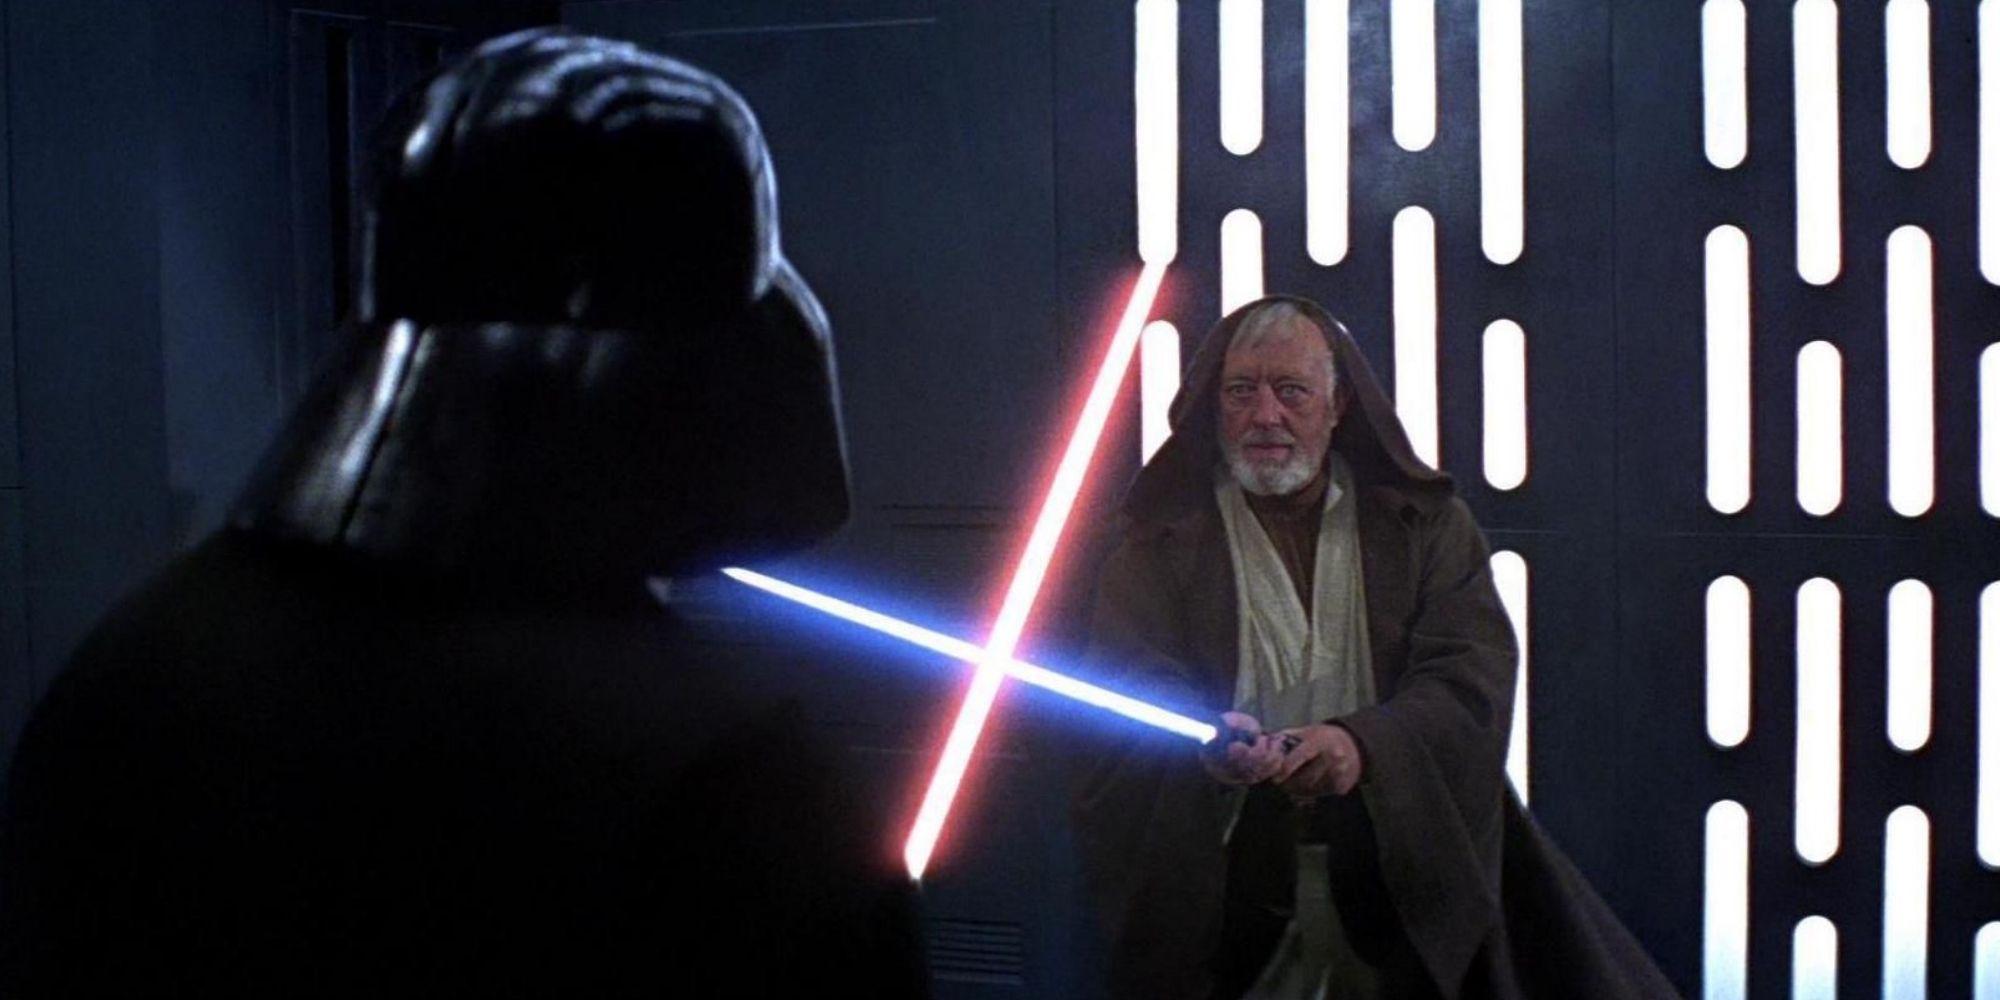 Obi-Wan Kenobi and Darth Vader fight on the Death Star in 'Star Wars: Episode IV - A New Hope'